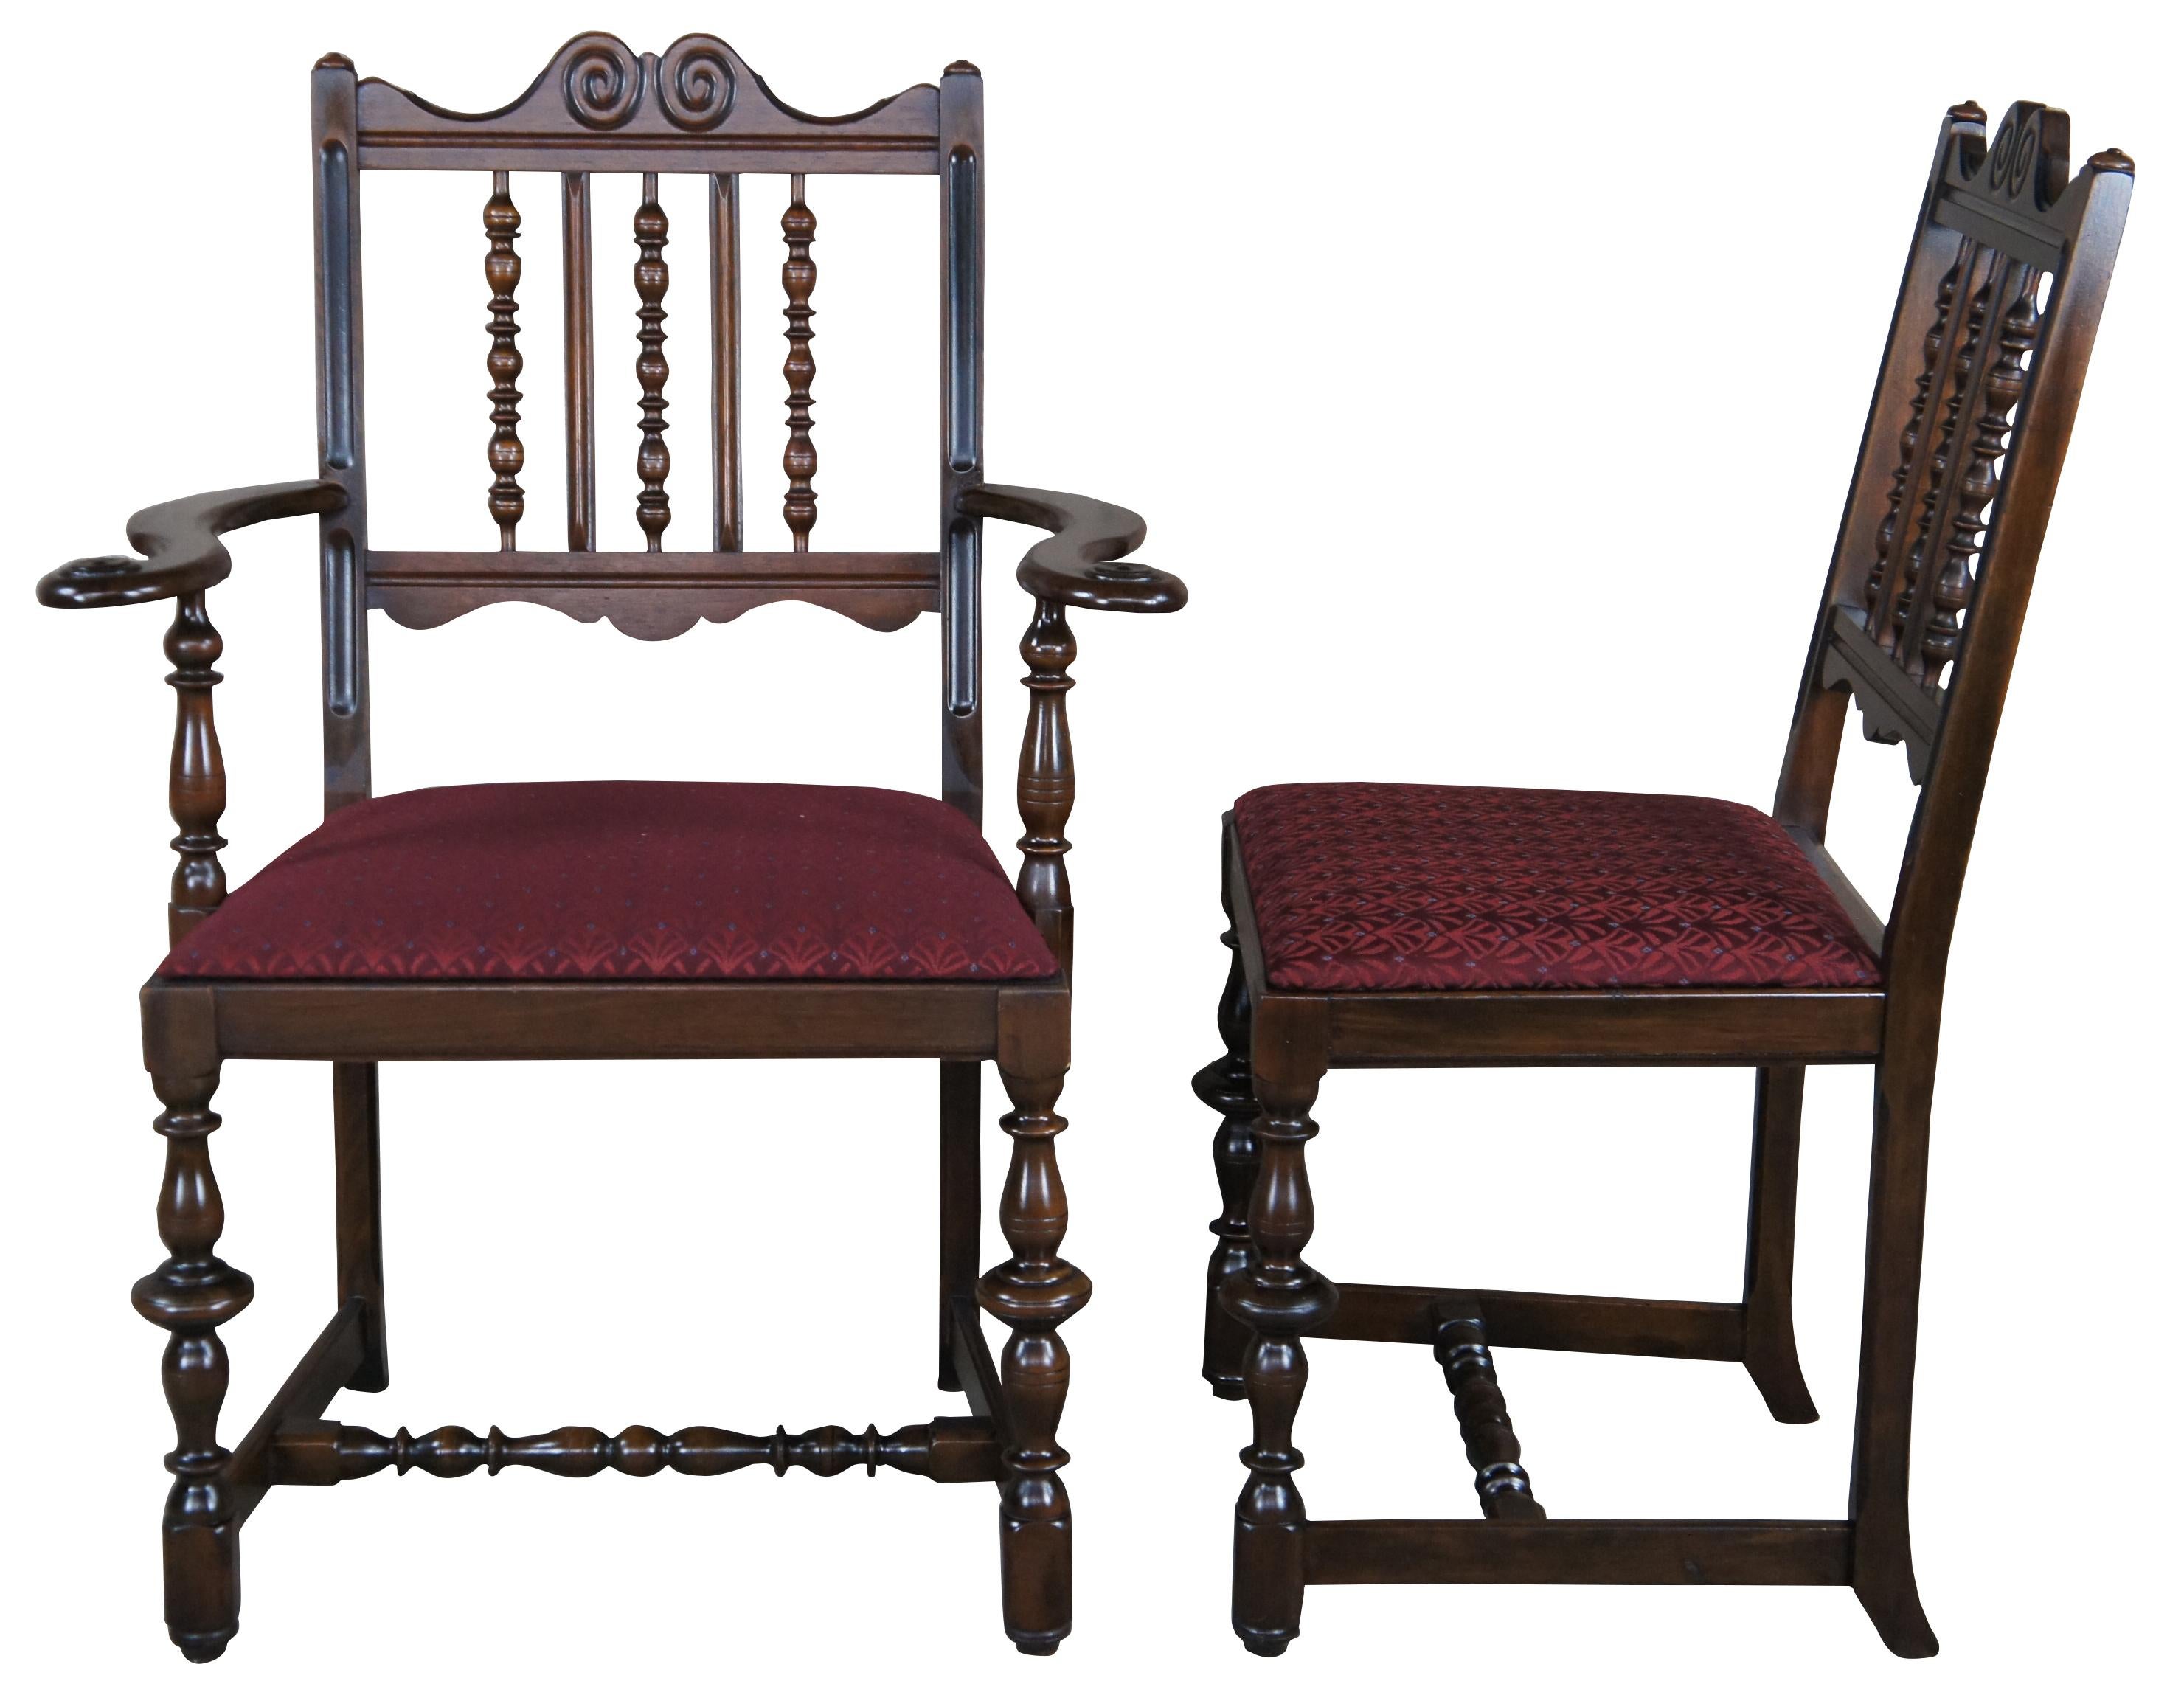 6 Grand rapids chair Company antique dining chairs, circa 1910-20s. Drawing inspiration from William & Mary and Jacobean styling. Made from walnut with a scrolled crest rail over spindled back and grooved stiles. Features beautifully turned legs